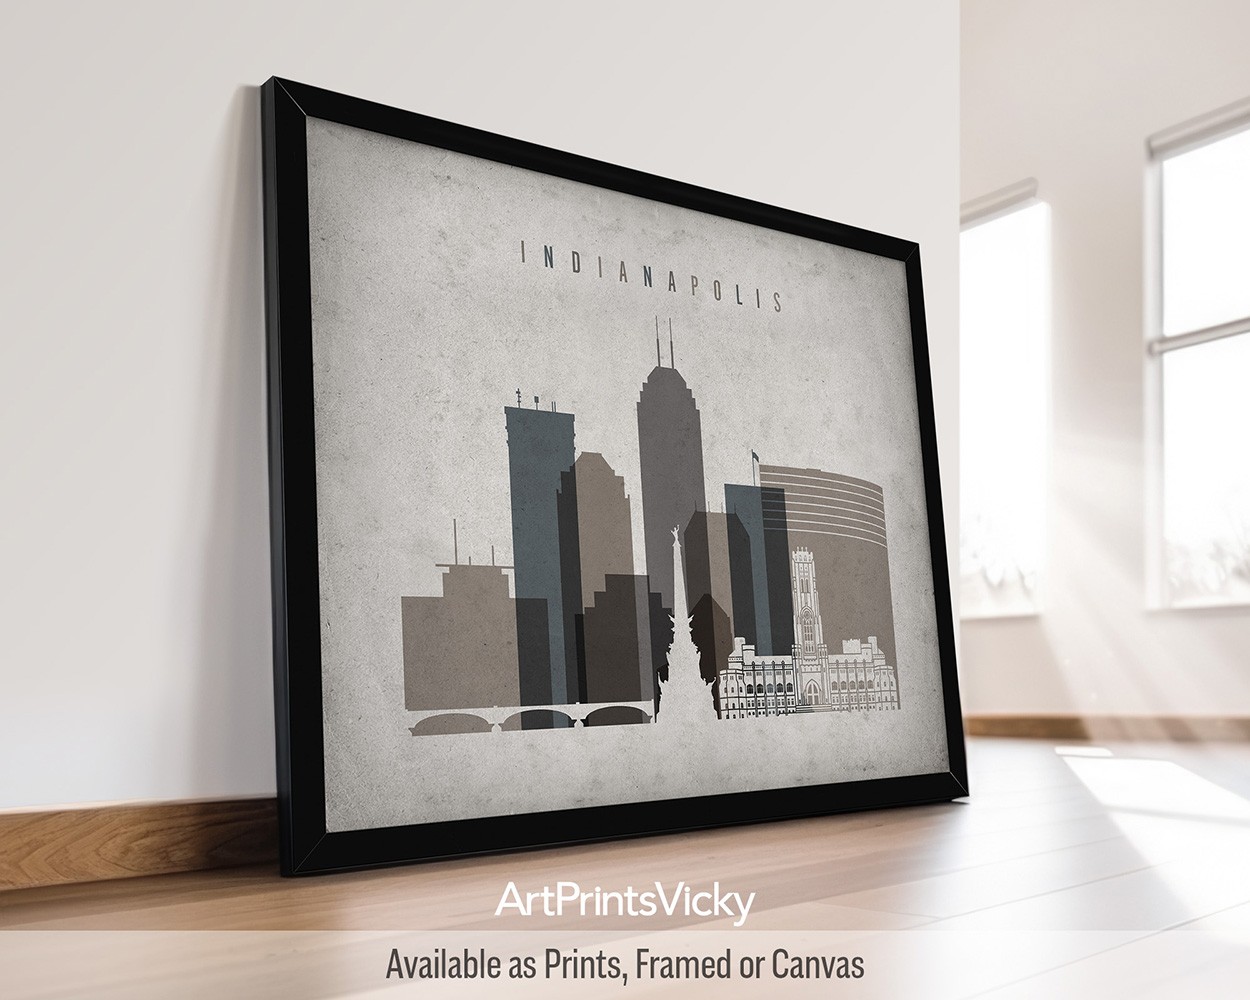 ndianapolis landscape city print featuring the Soldiers' and Sailors' Monument, the city skyline, all rendered in a rich and textured earthy vintage style, by ArtPrintsVicky.